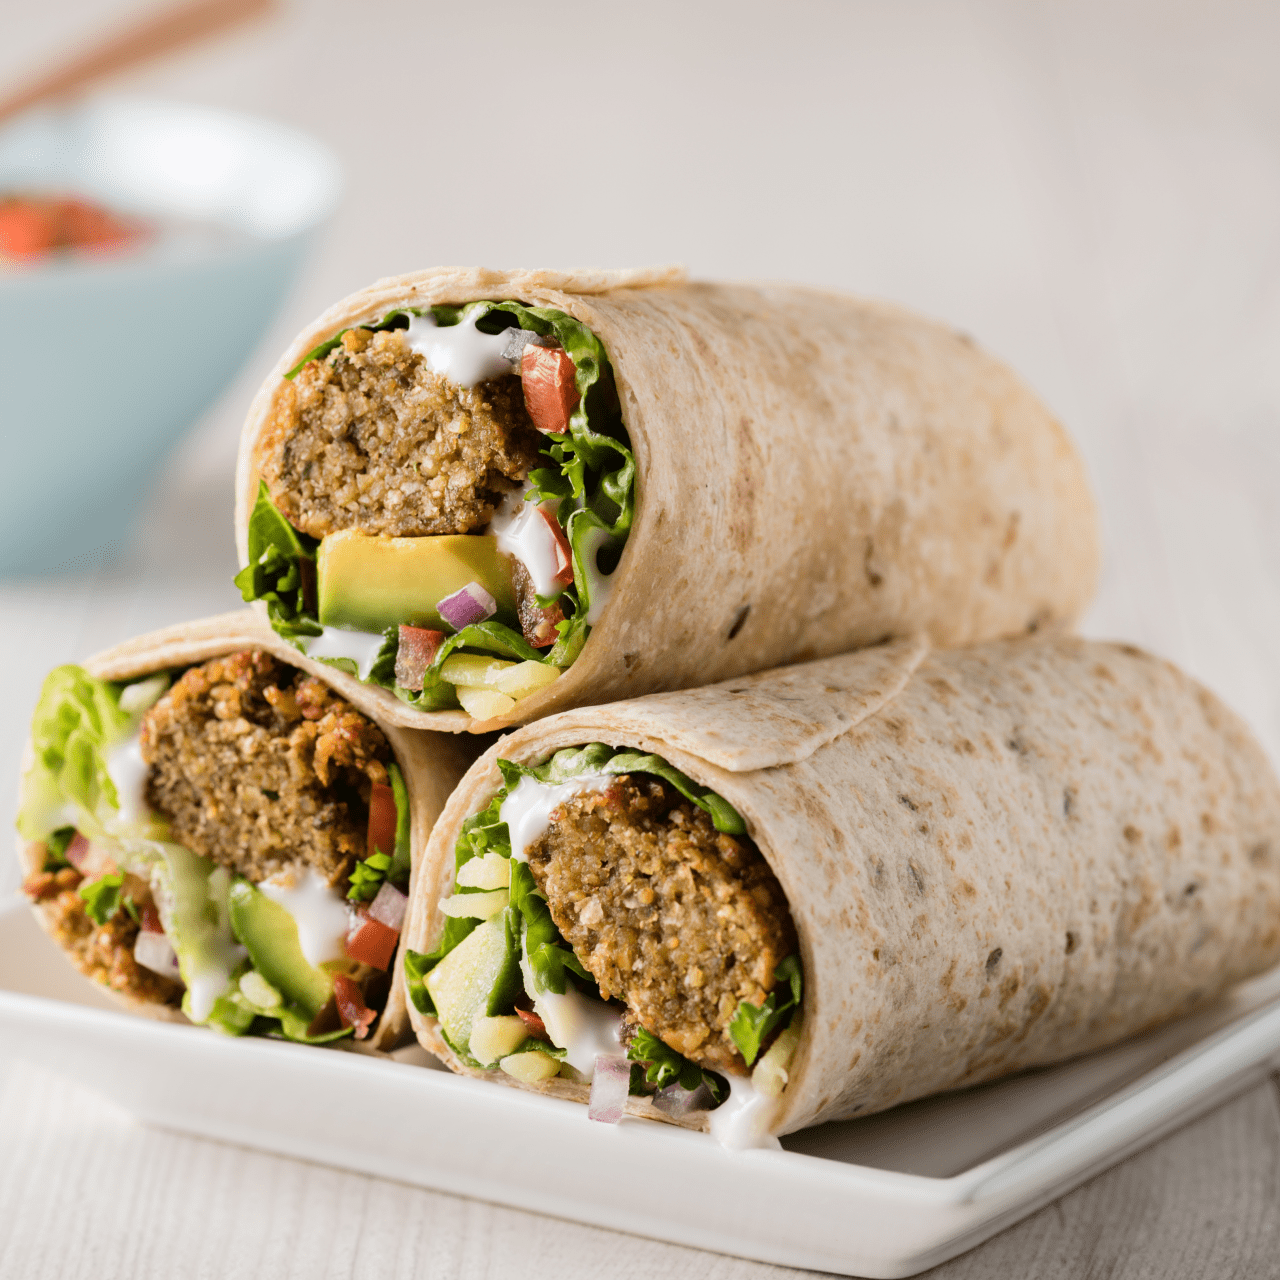 Product Review: Wrap Breads